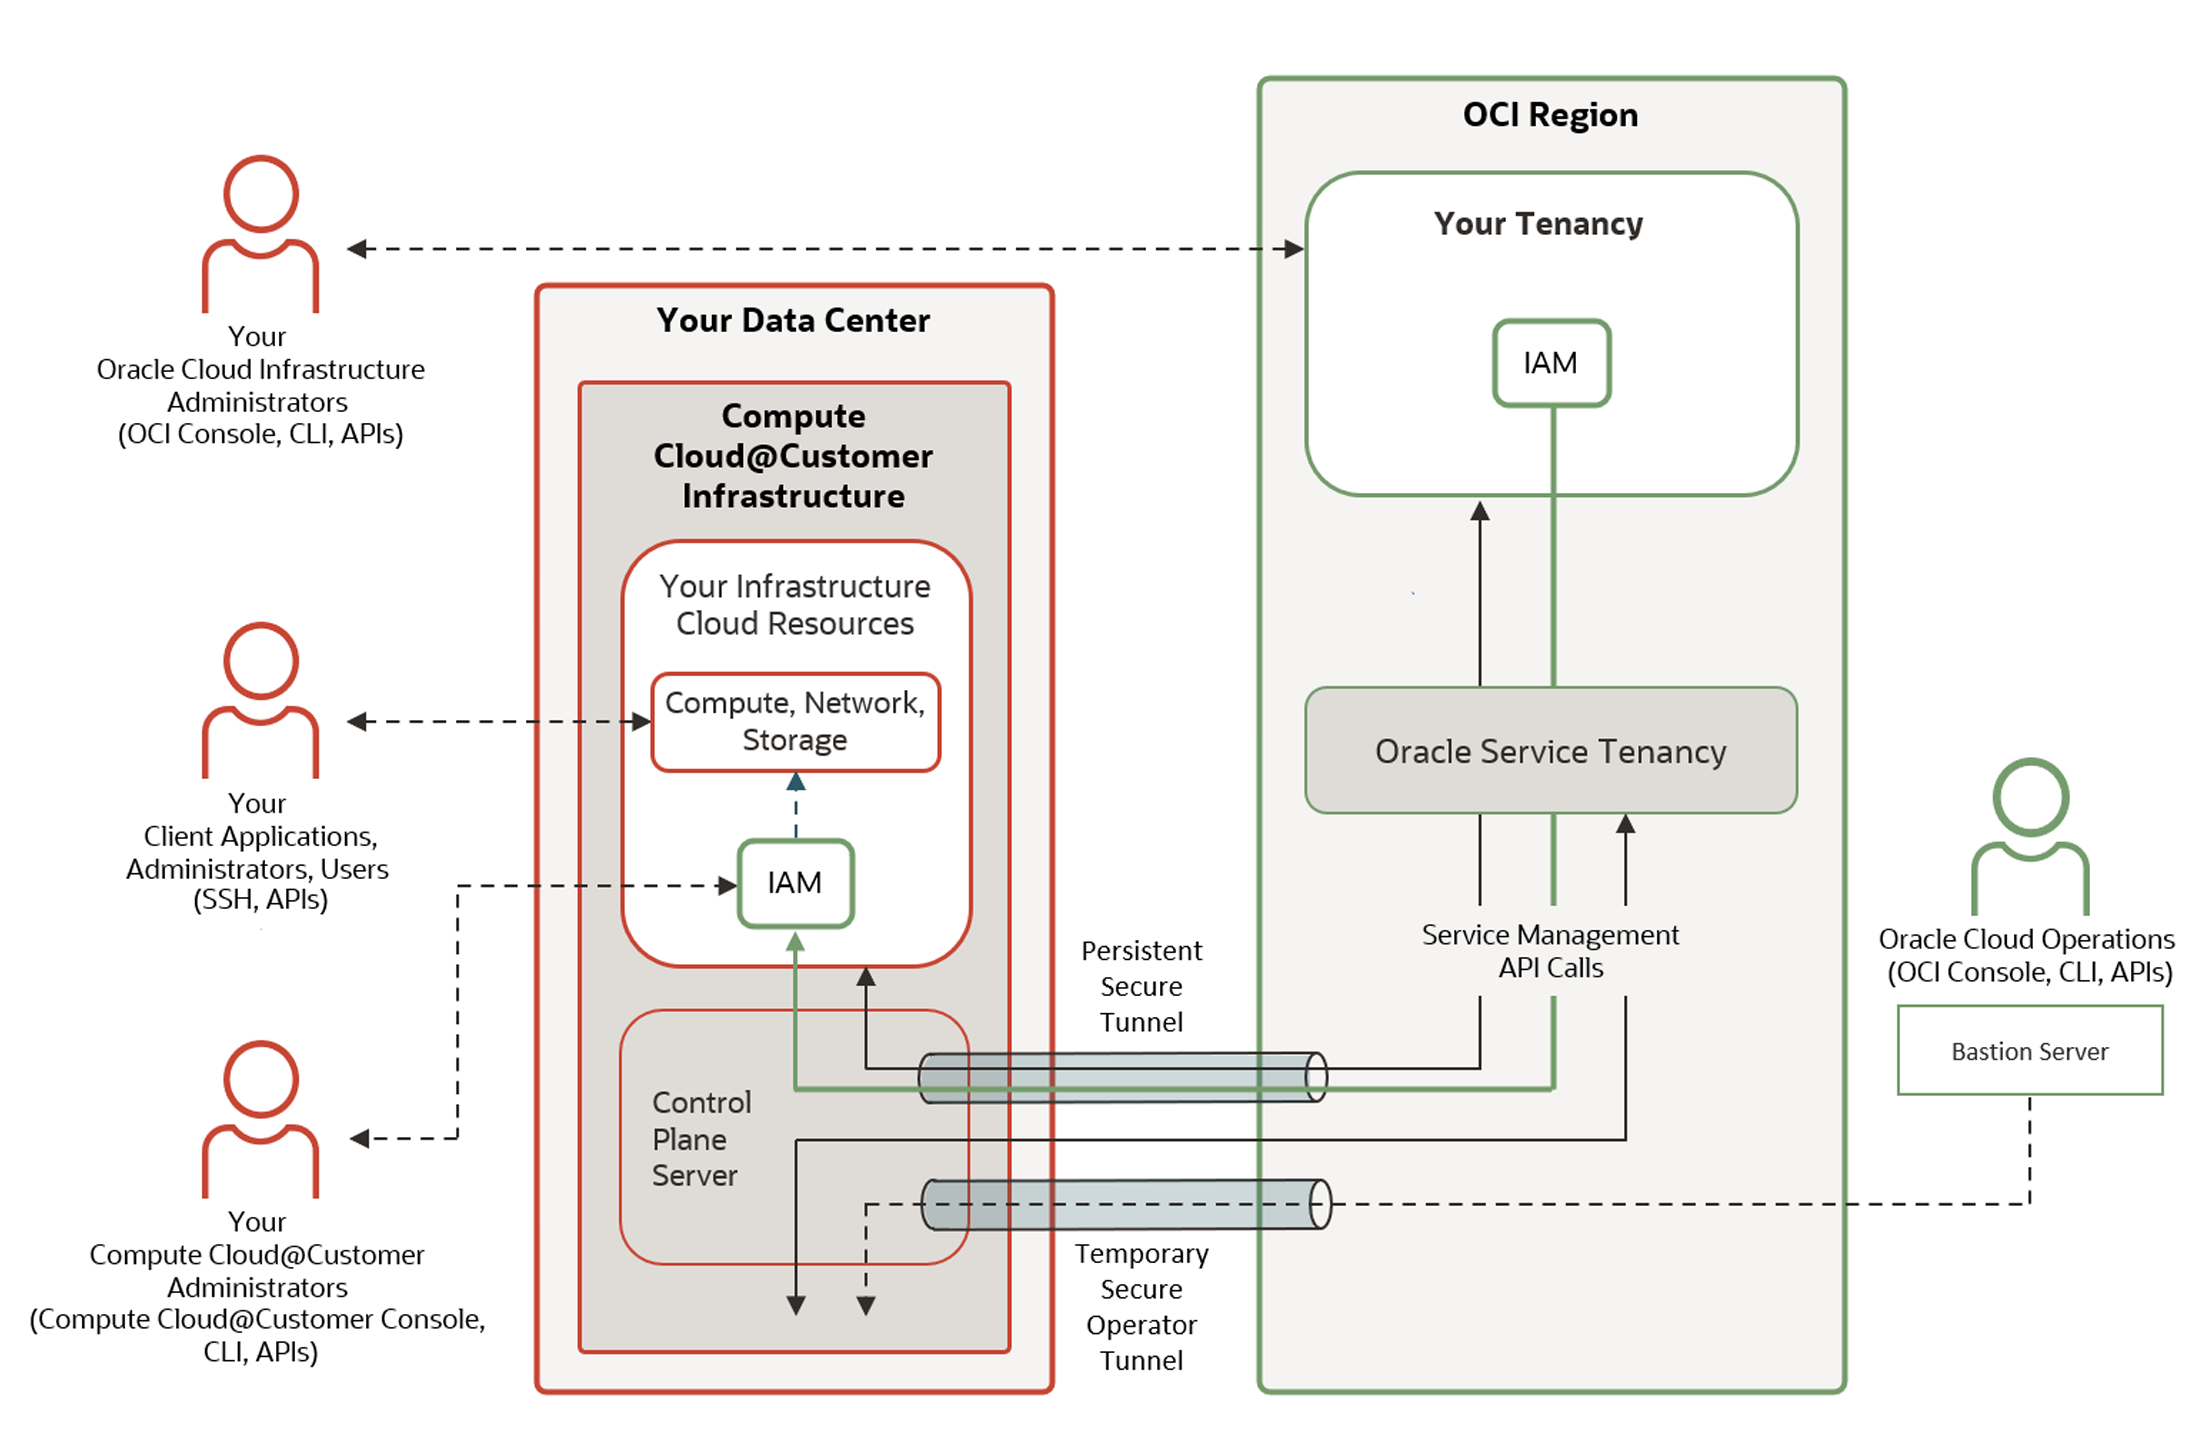 A diagram showing your tenancy in an OCI region, and how it connects to Compute Cloud@Customer in your data center.